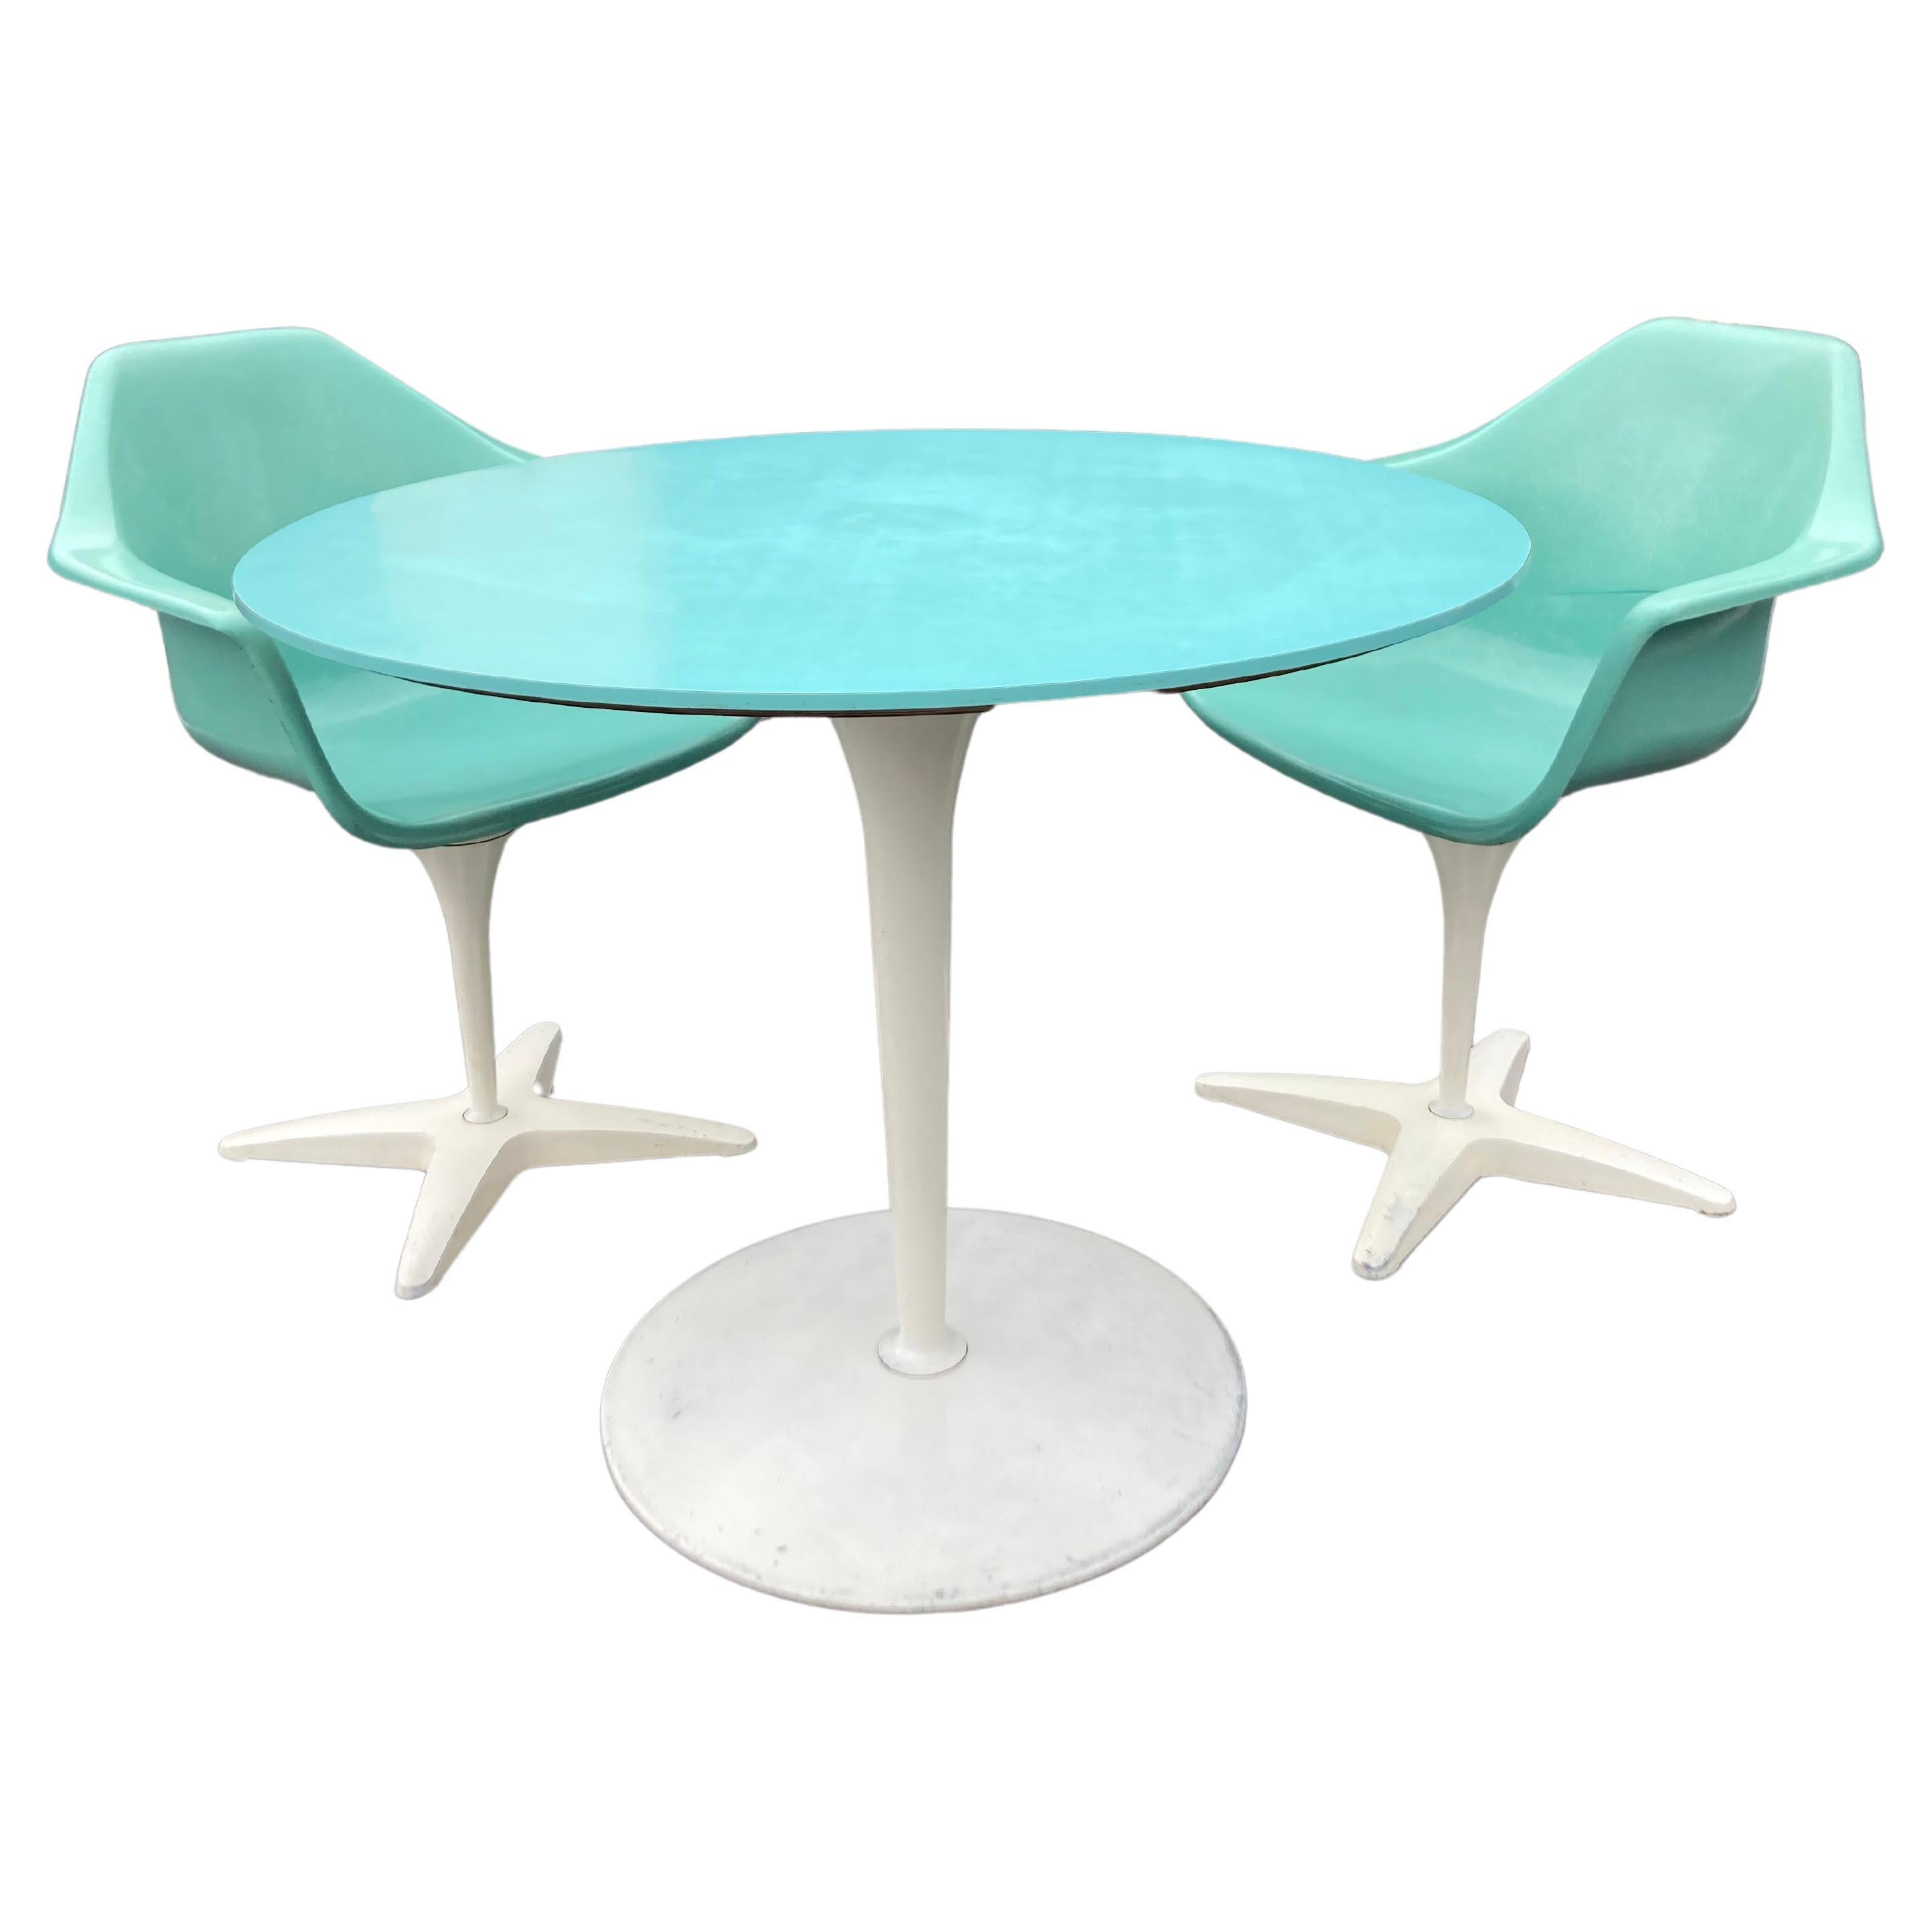 1960s Kitchen Dinette Set, Fiberglass Chairs, Turquoise, Round Table, USA For Sale